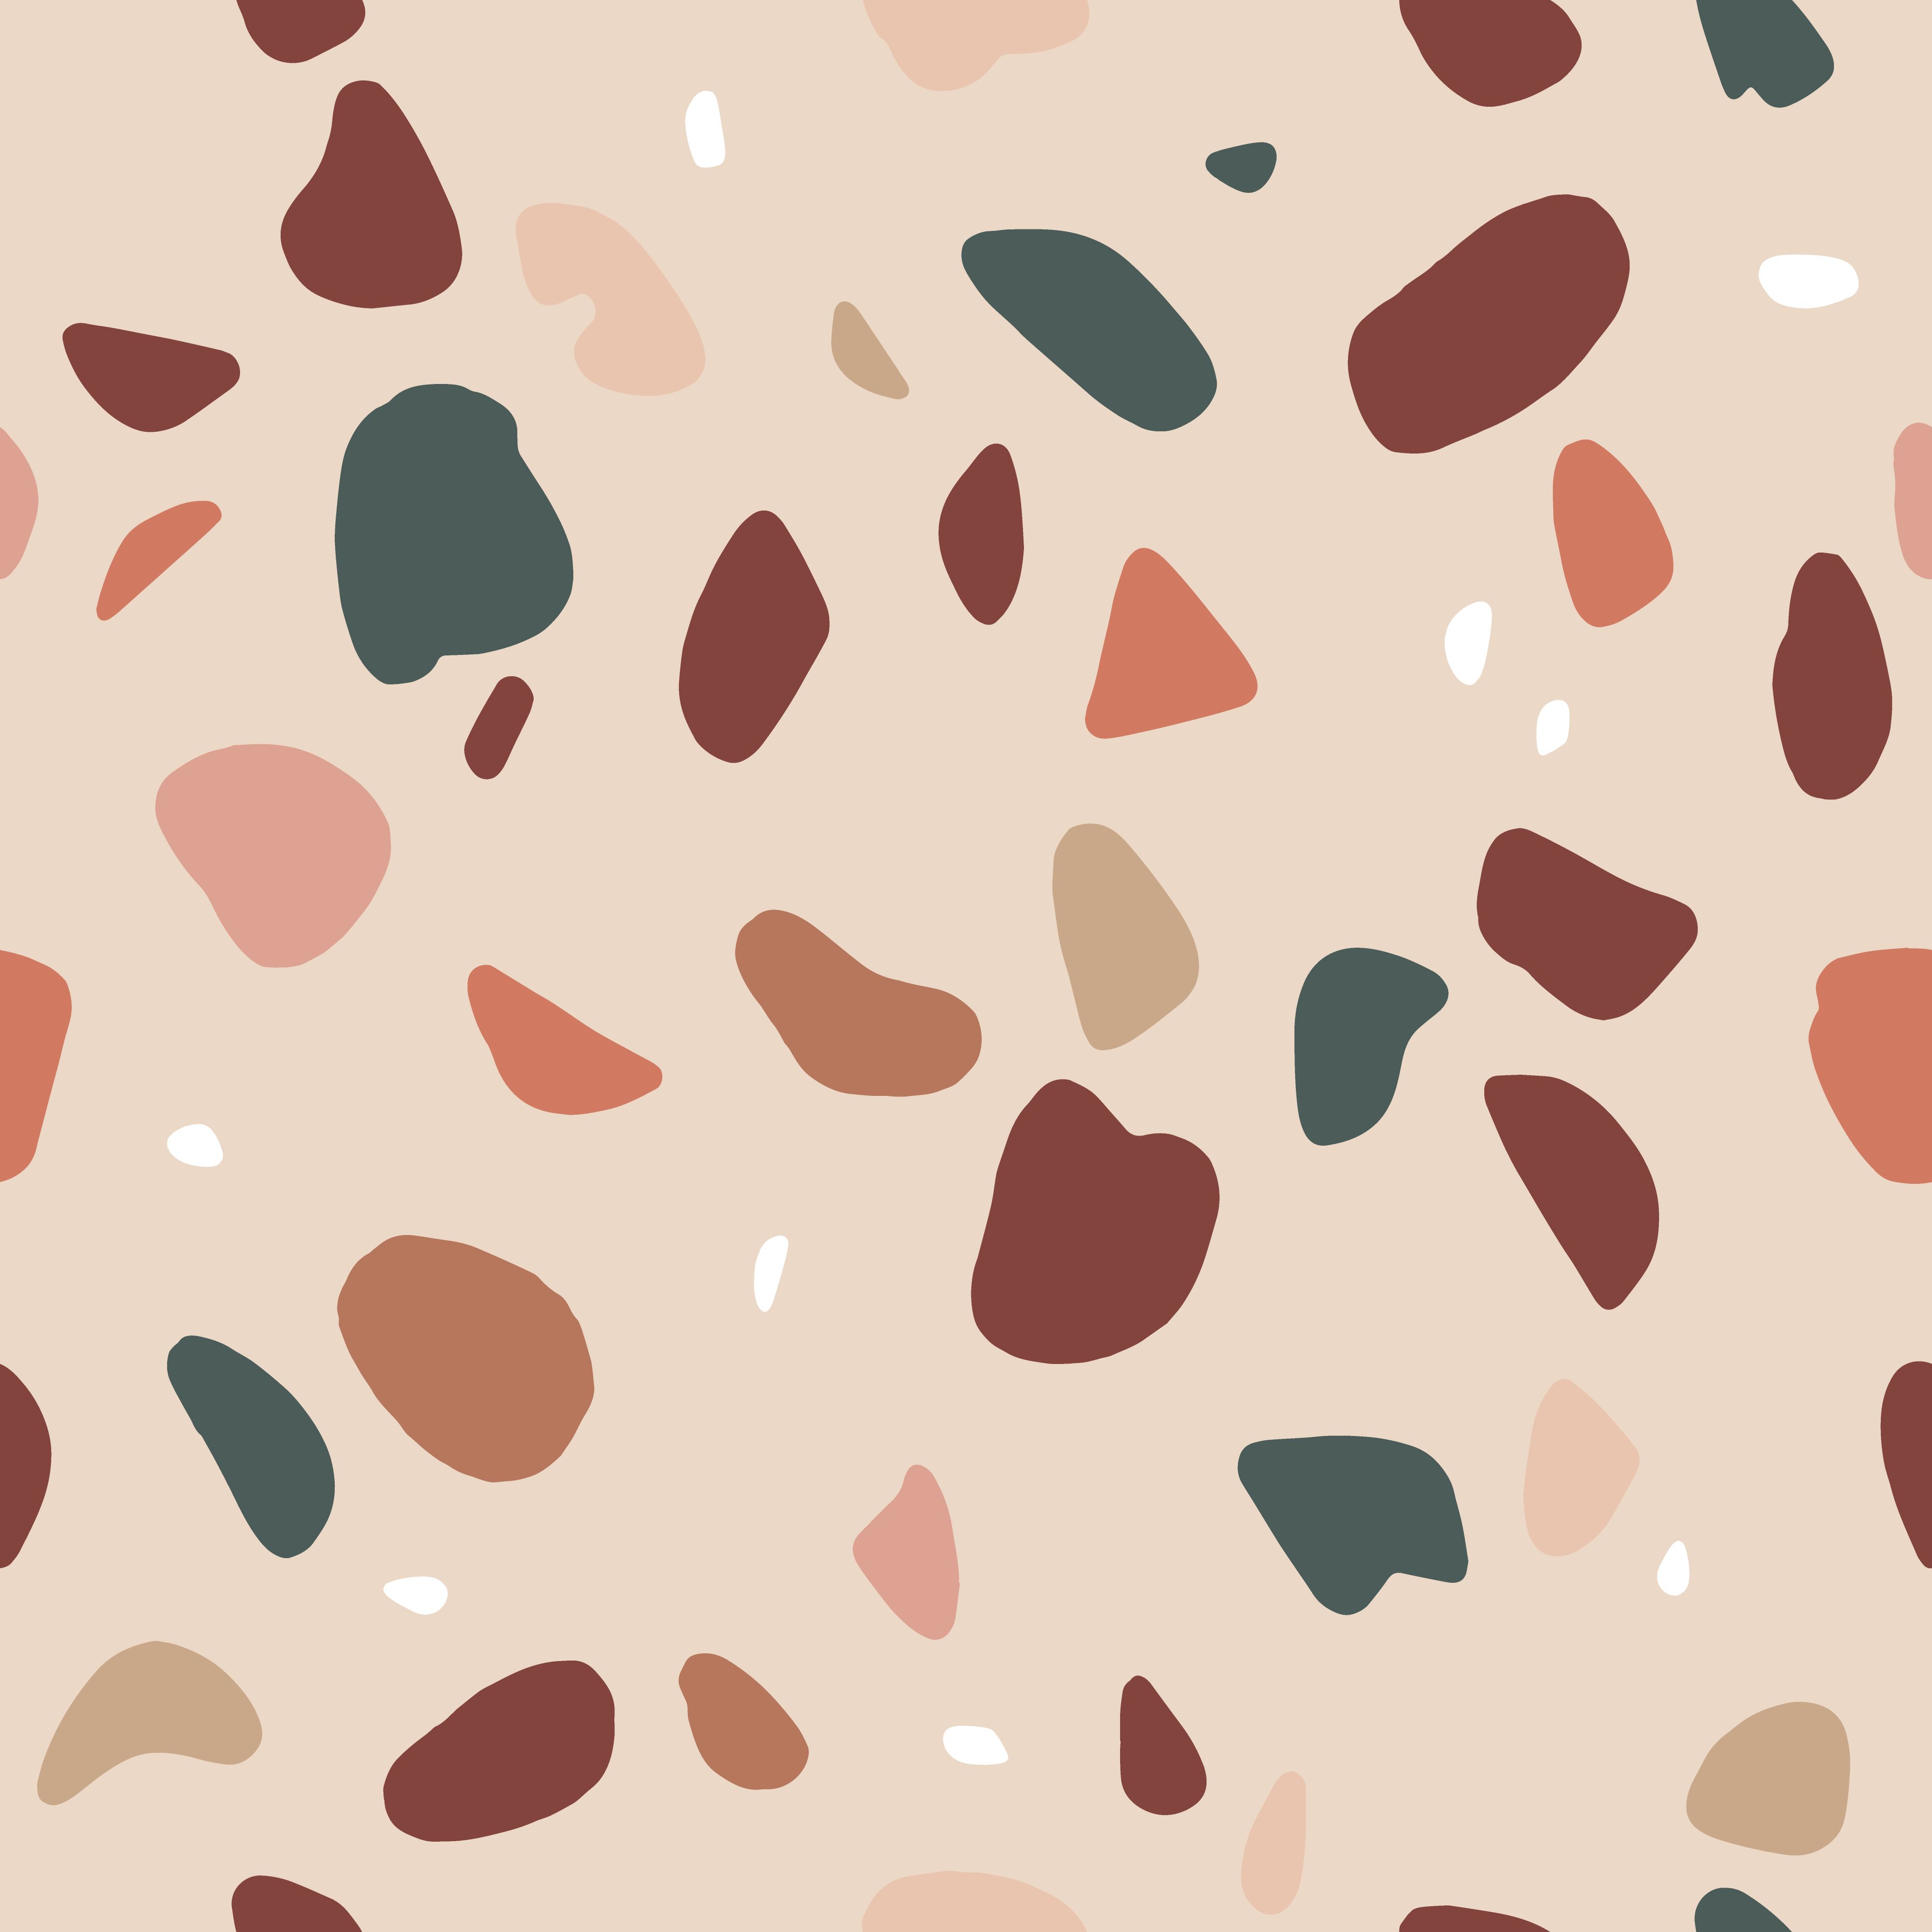 A watercolor pattern of brown, pink, and green shapes on a pink background - Terracotta, terrazzo